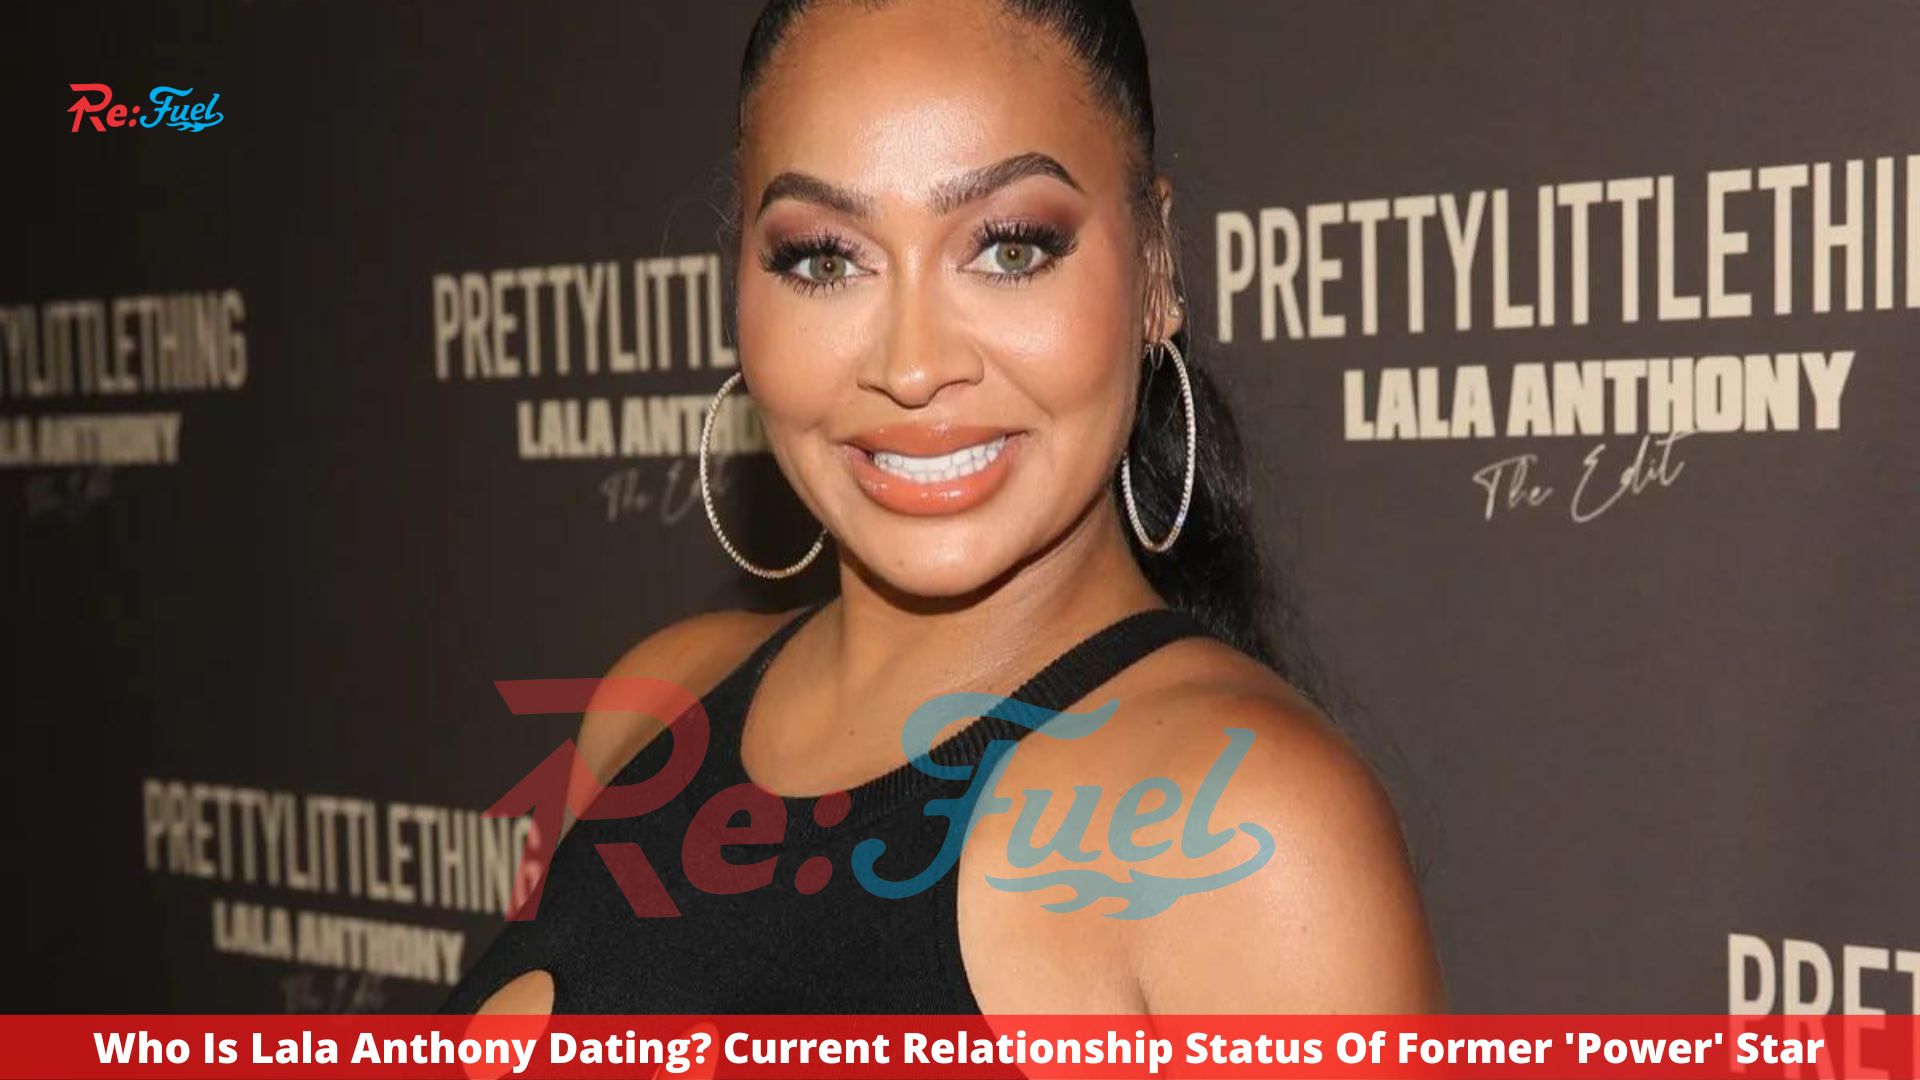 Who Is Lala Anthony Dating? Current Relationship Status Of Former 'Power' Star